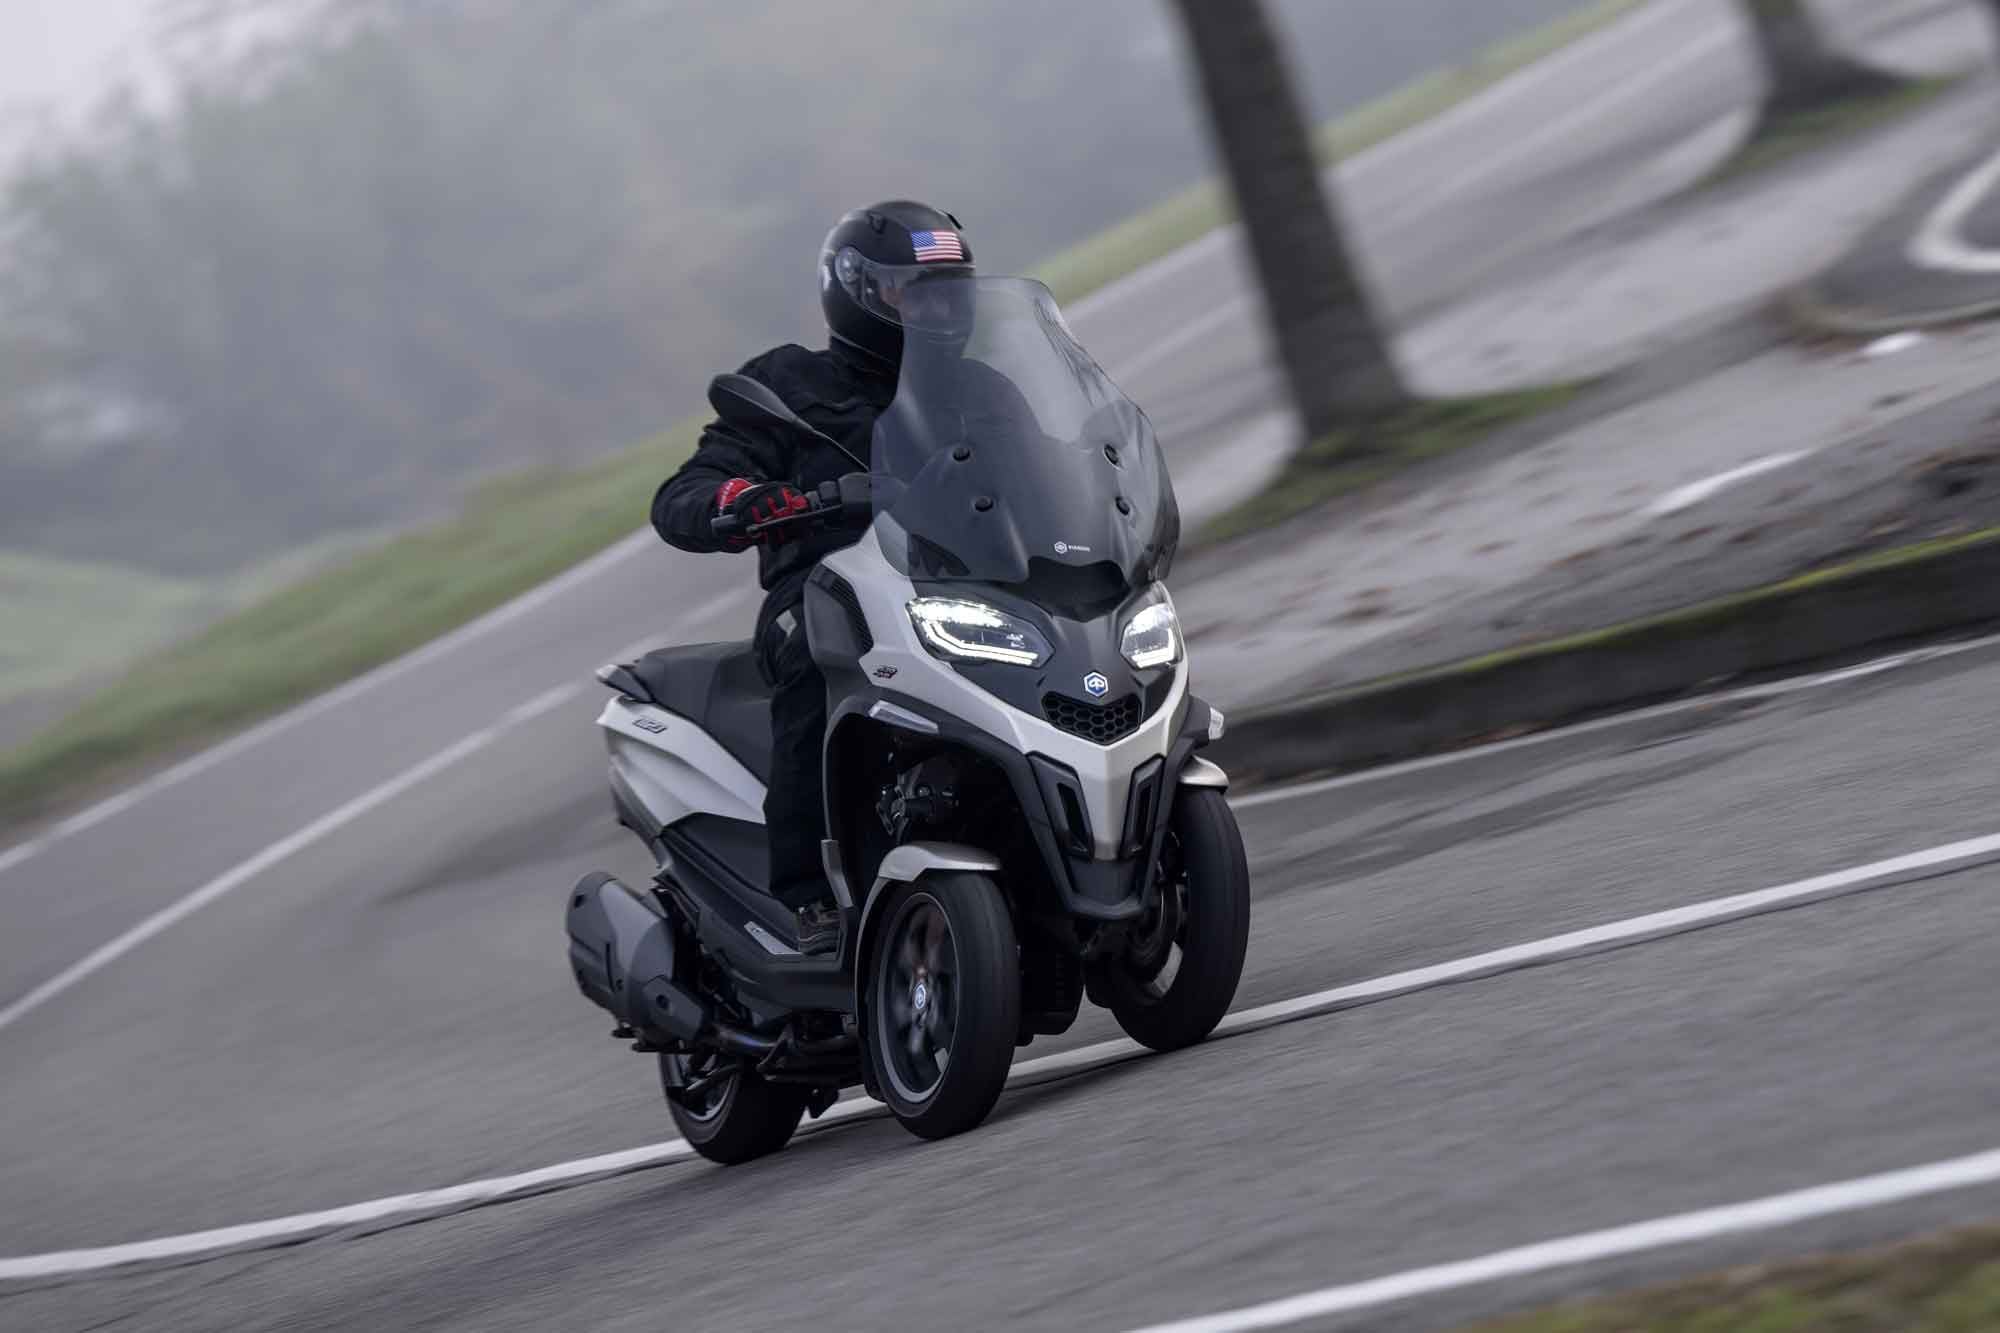 Want some real front footprint? Then you owe it to yourself to experience a Piaggio MP3. The new 530 Exclusive is the latest model.